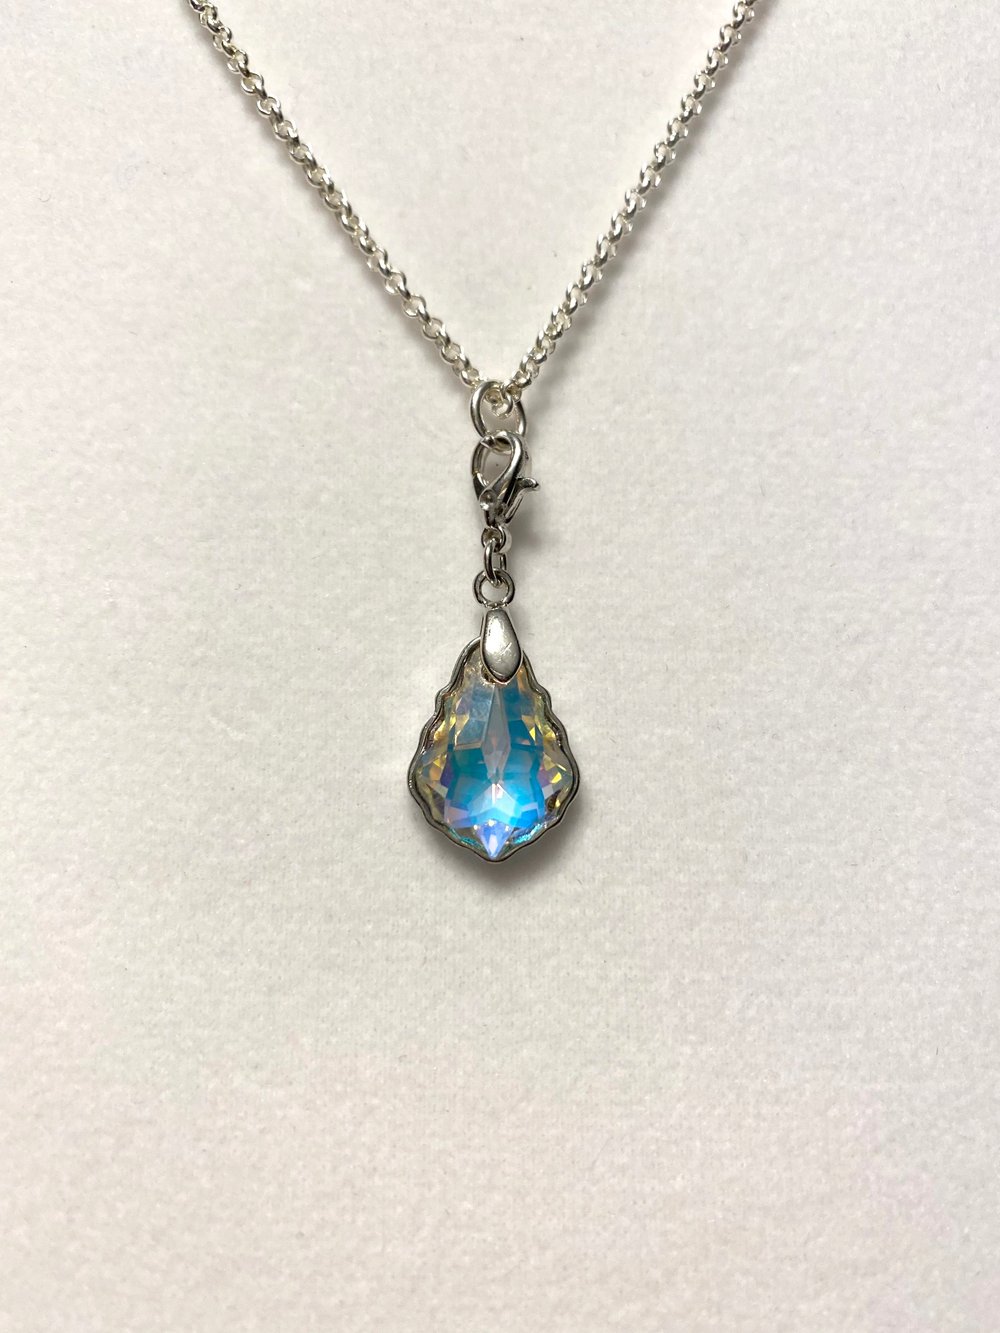 Baroque Crystal Pendant and Silver Chain Necklace